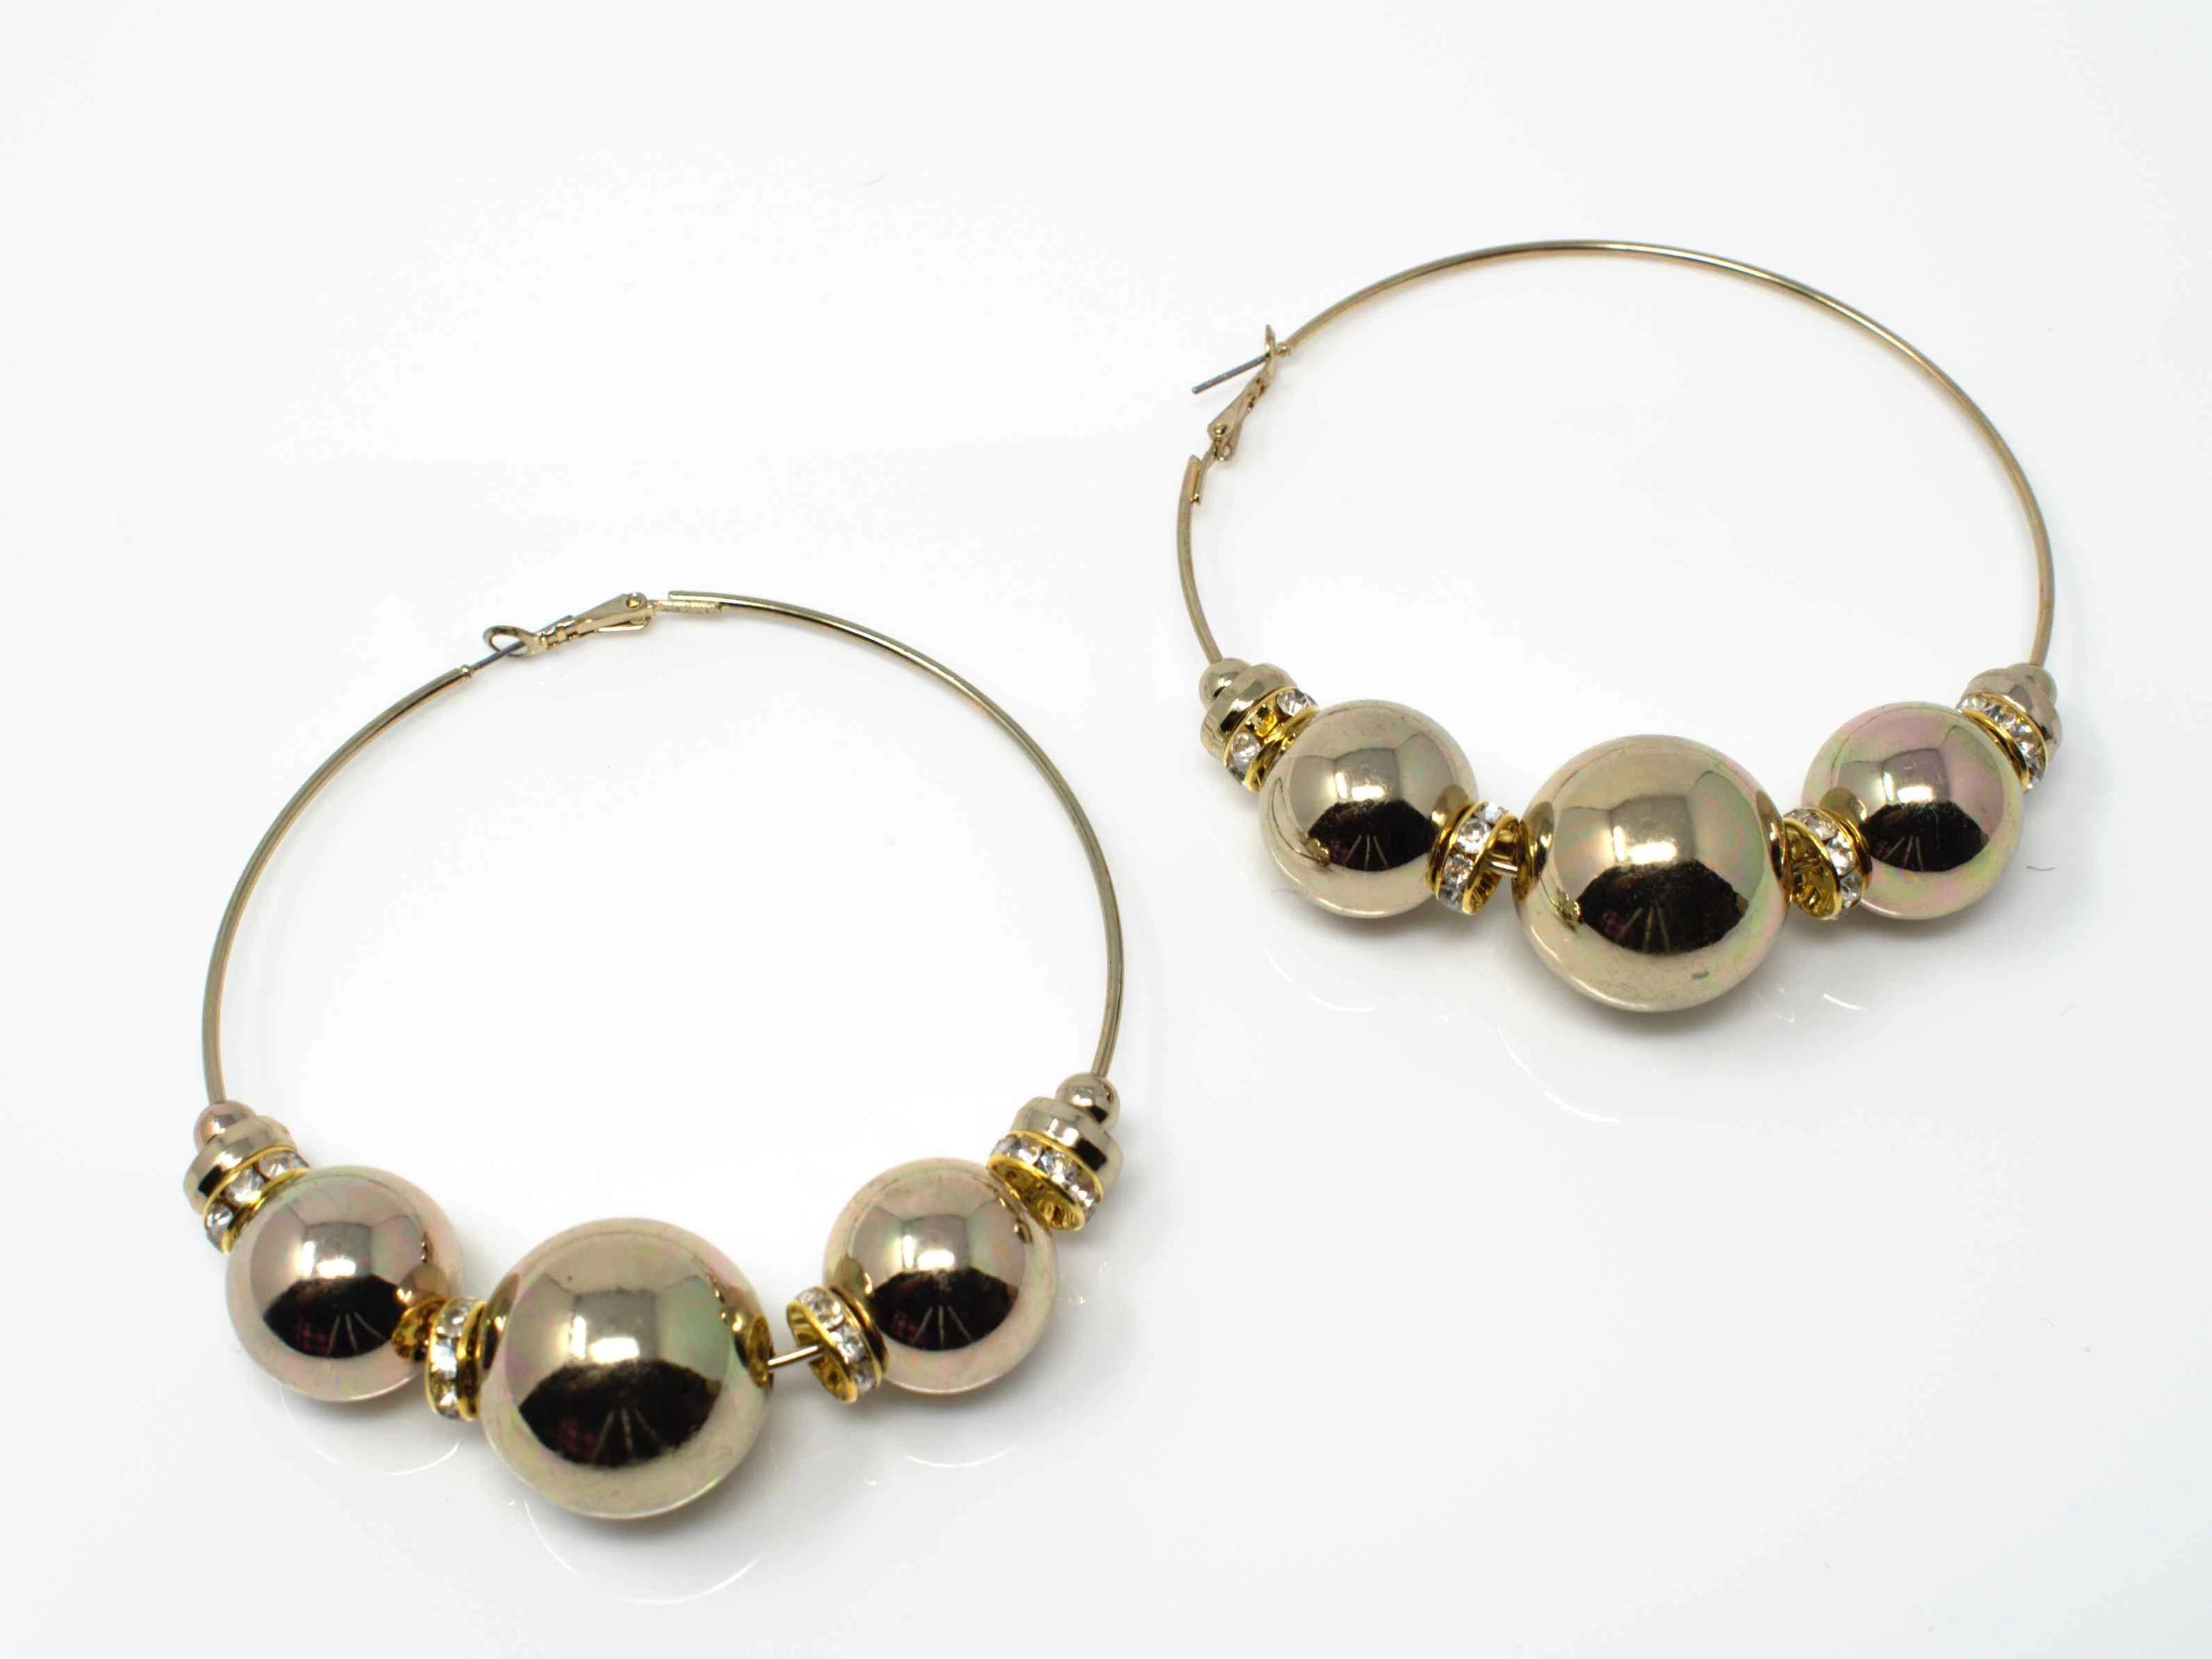 A distinctive gold hoop fashion earring with ball and stone accents.